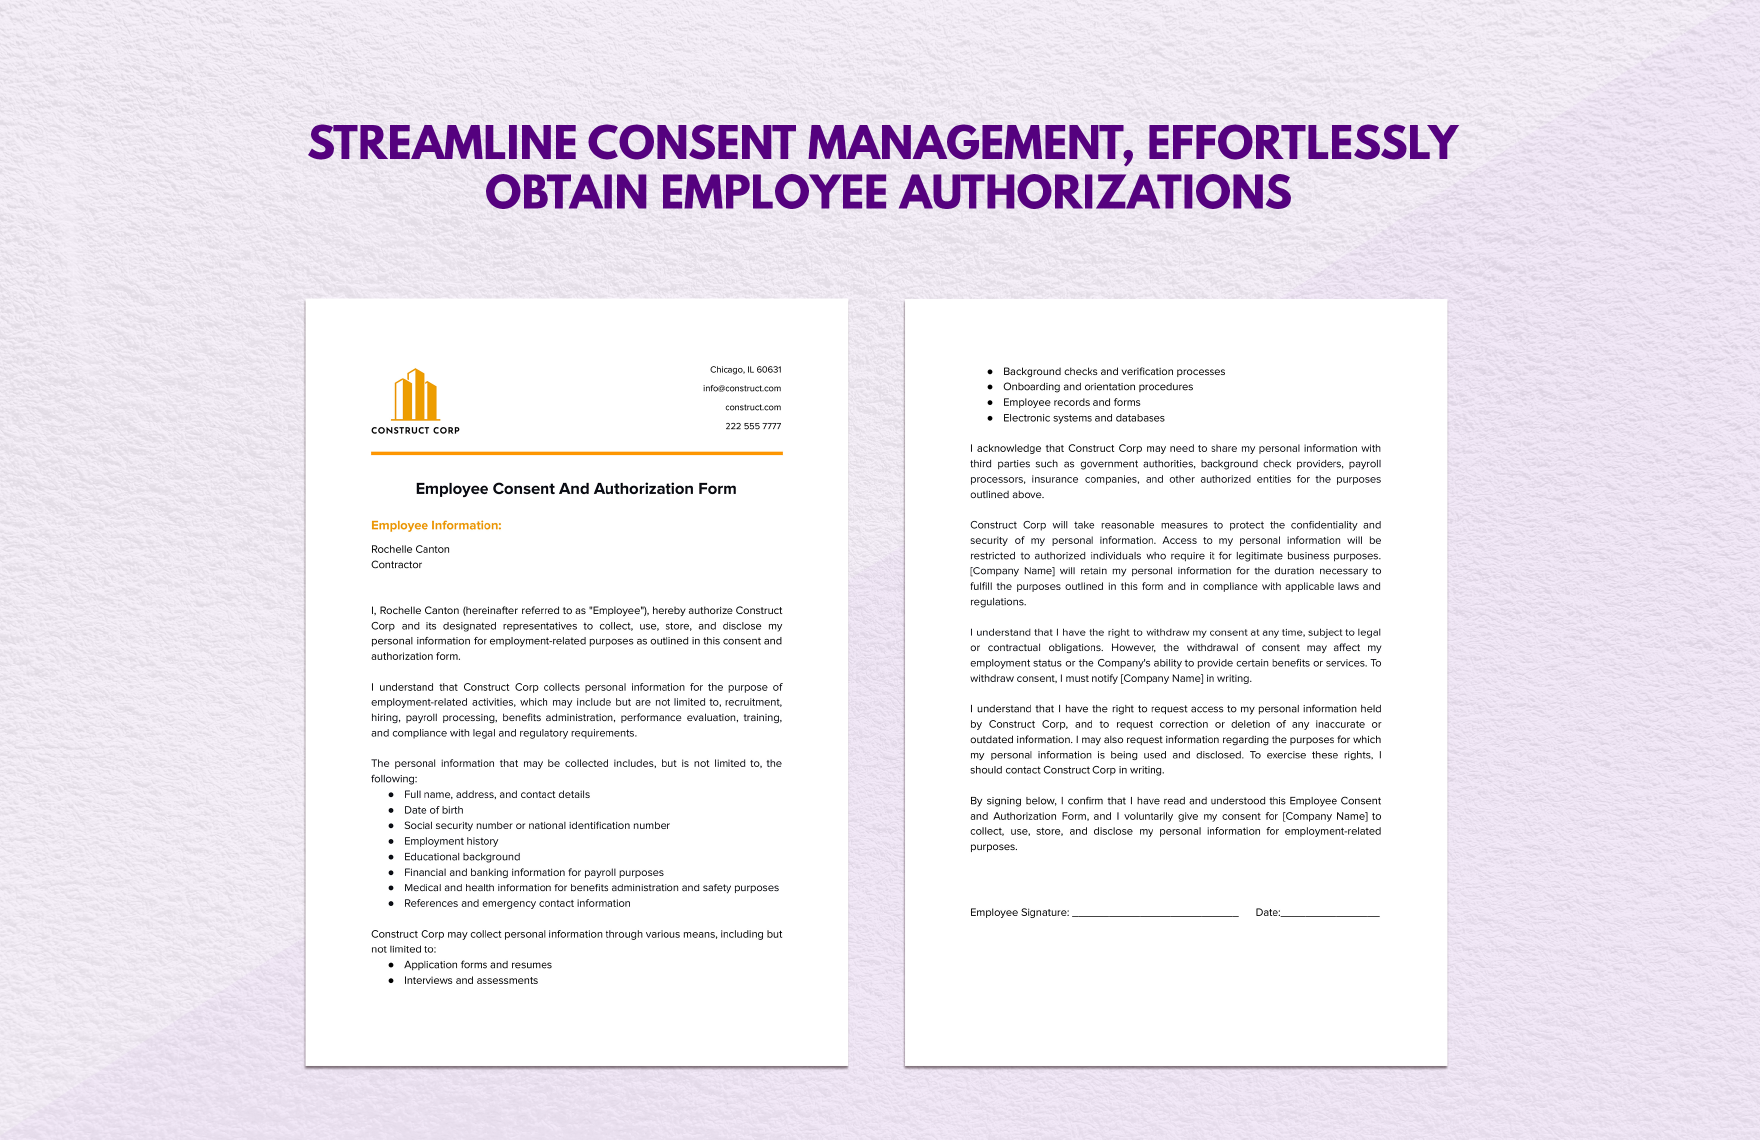 Employee Consent and Authorization Form